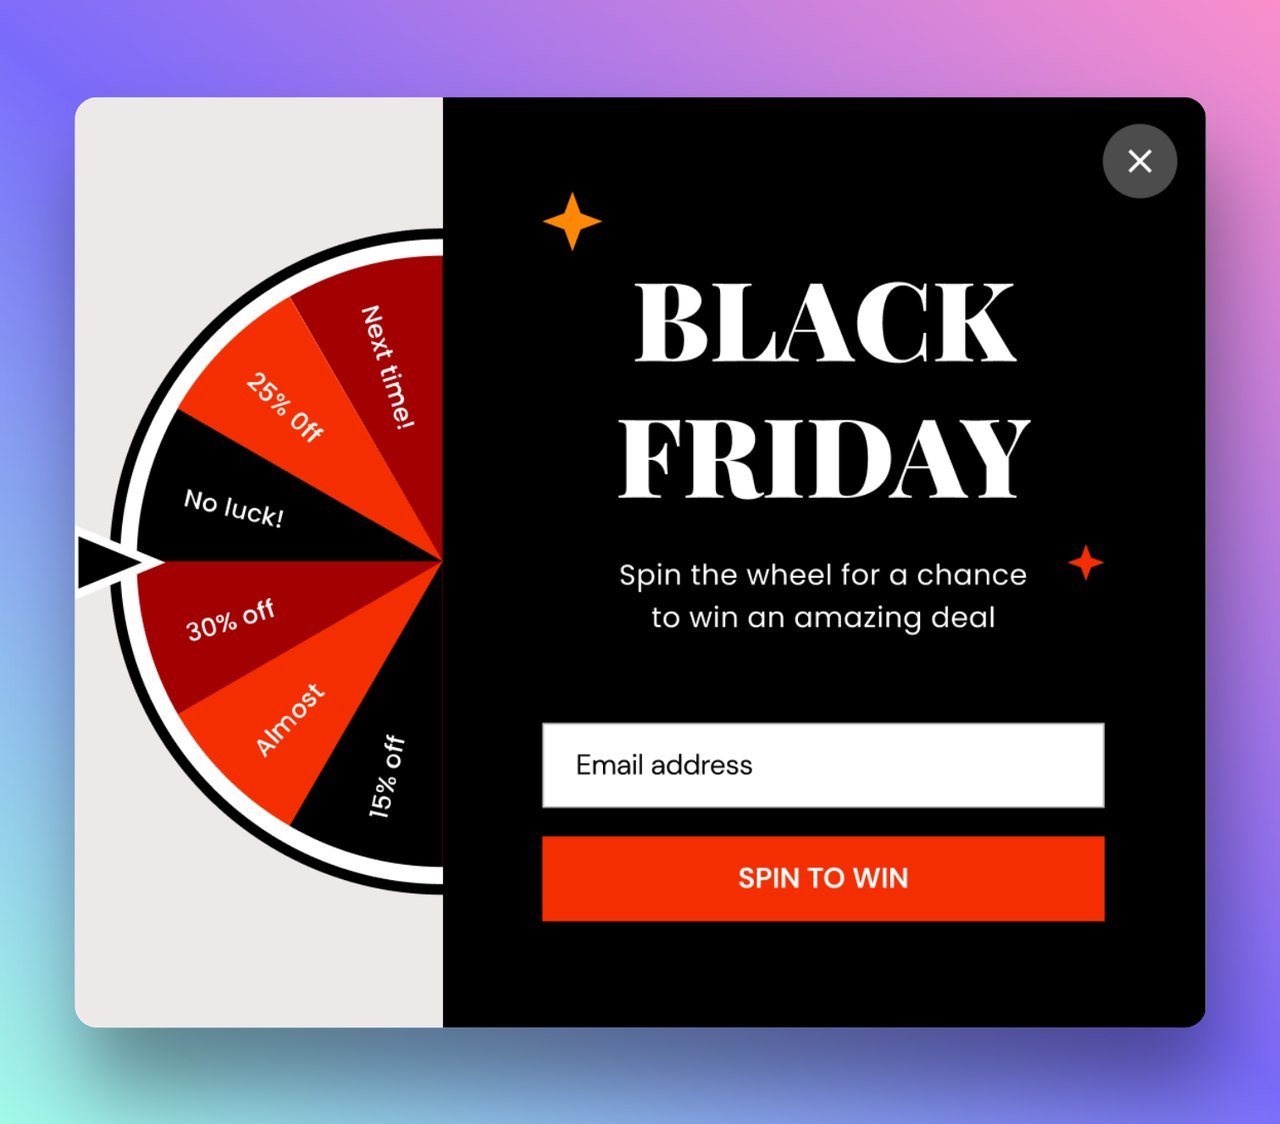 Black friday wheel popup gamification example offering discount in return for users' email address